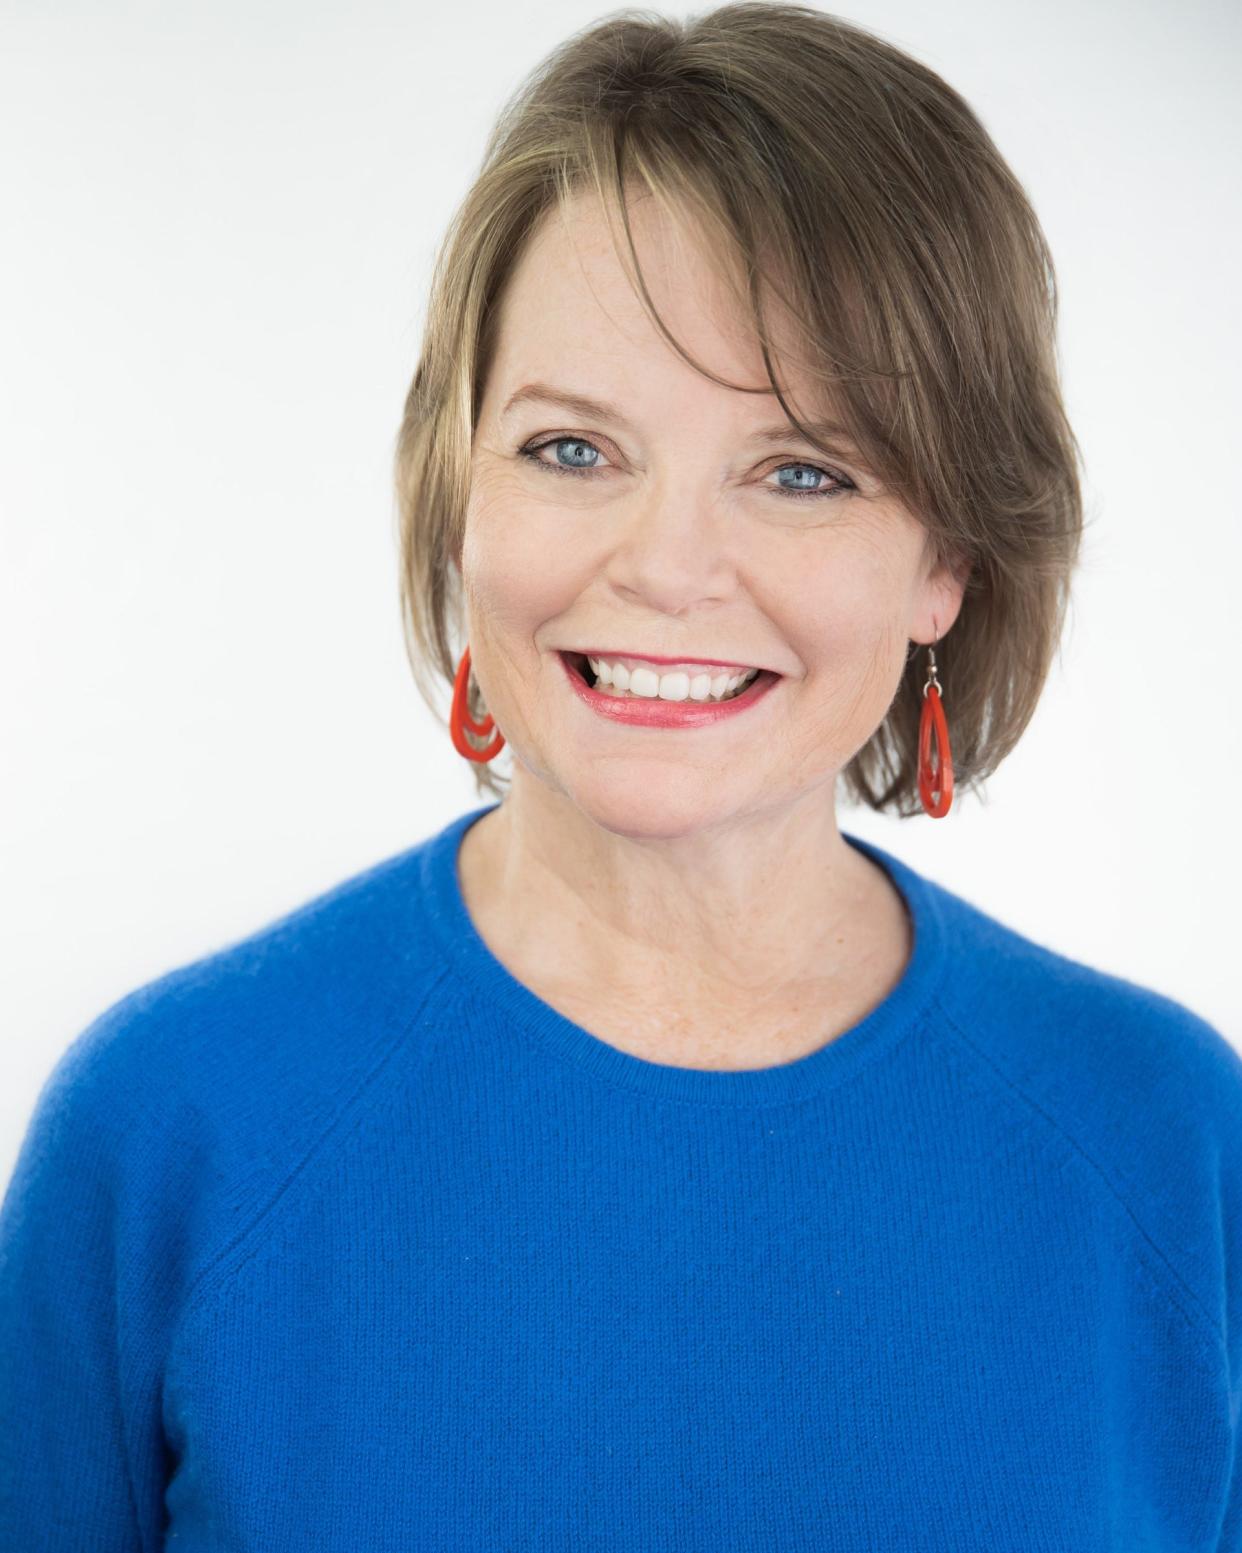 Celia Rivenbark is a humor columnist and NYT-bestselling author.